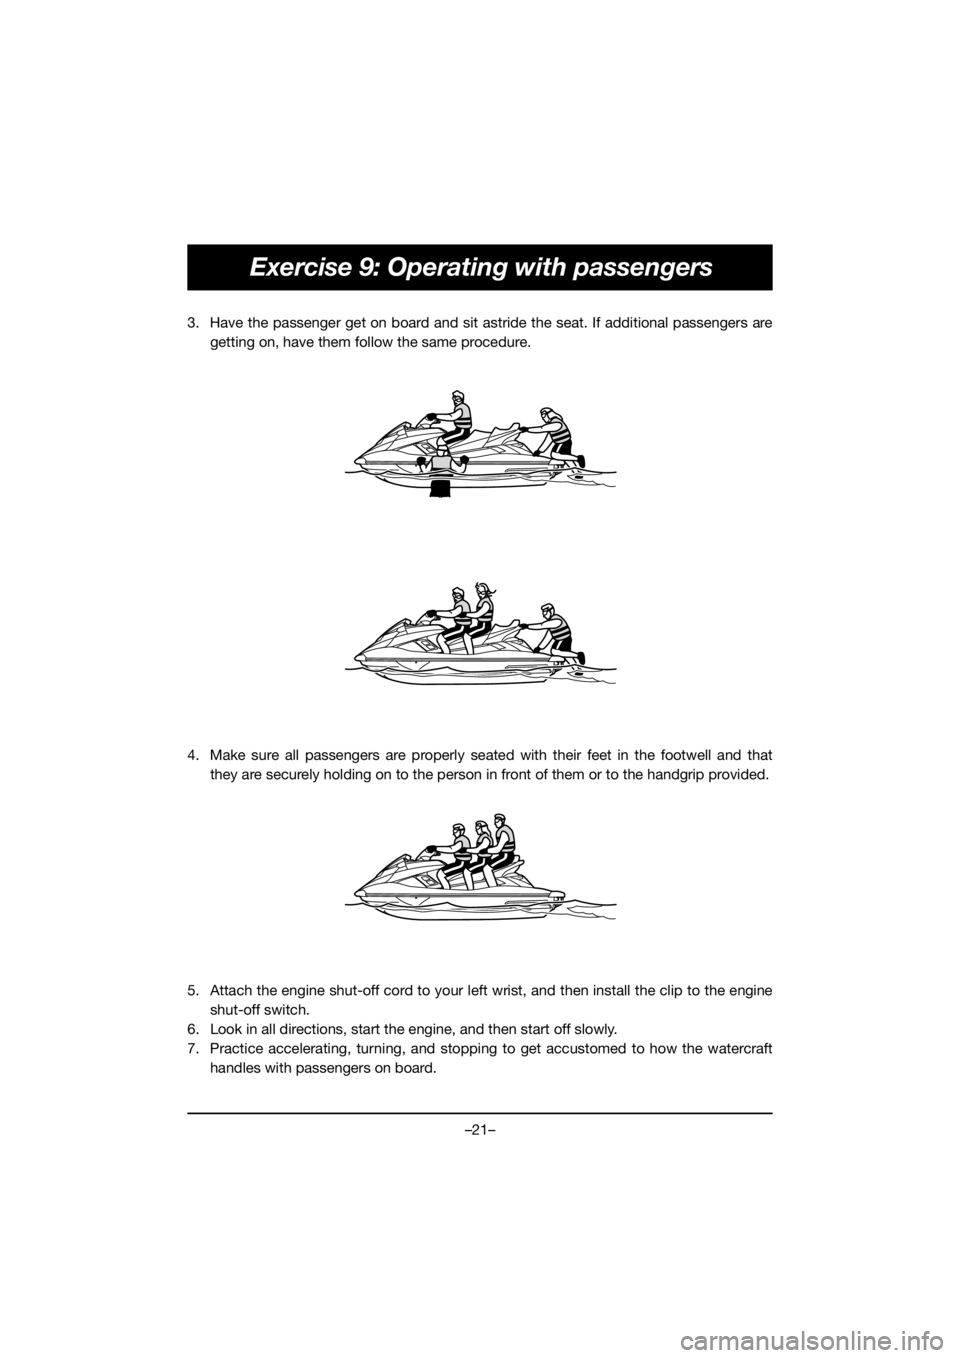 YAMAHA FX HO 2018  Manuale duso (in Italian) –21–
Exercise 9: Operating with passengers
3. Have the passenger get on board and sit astride the seat. If additional passengers are
getting on, have them follow the same procedure.
4. Make sure a